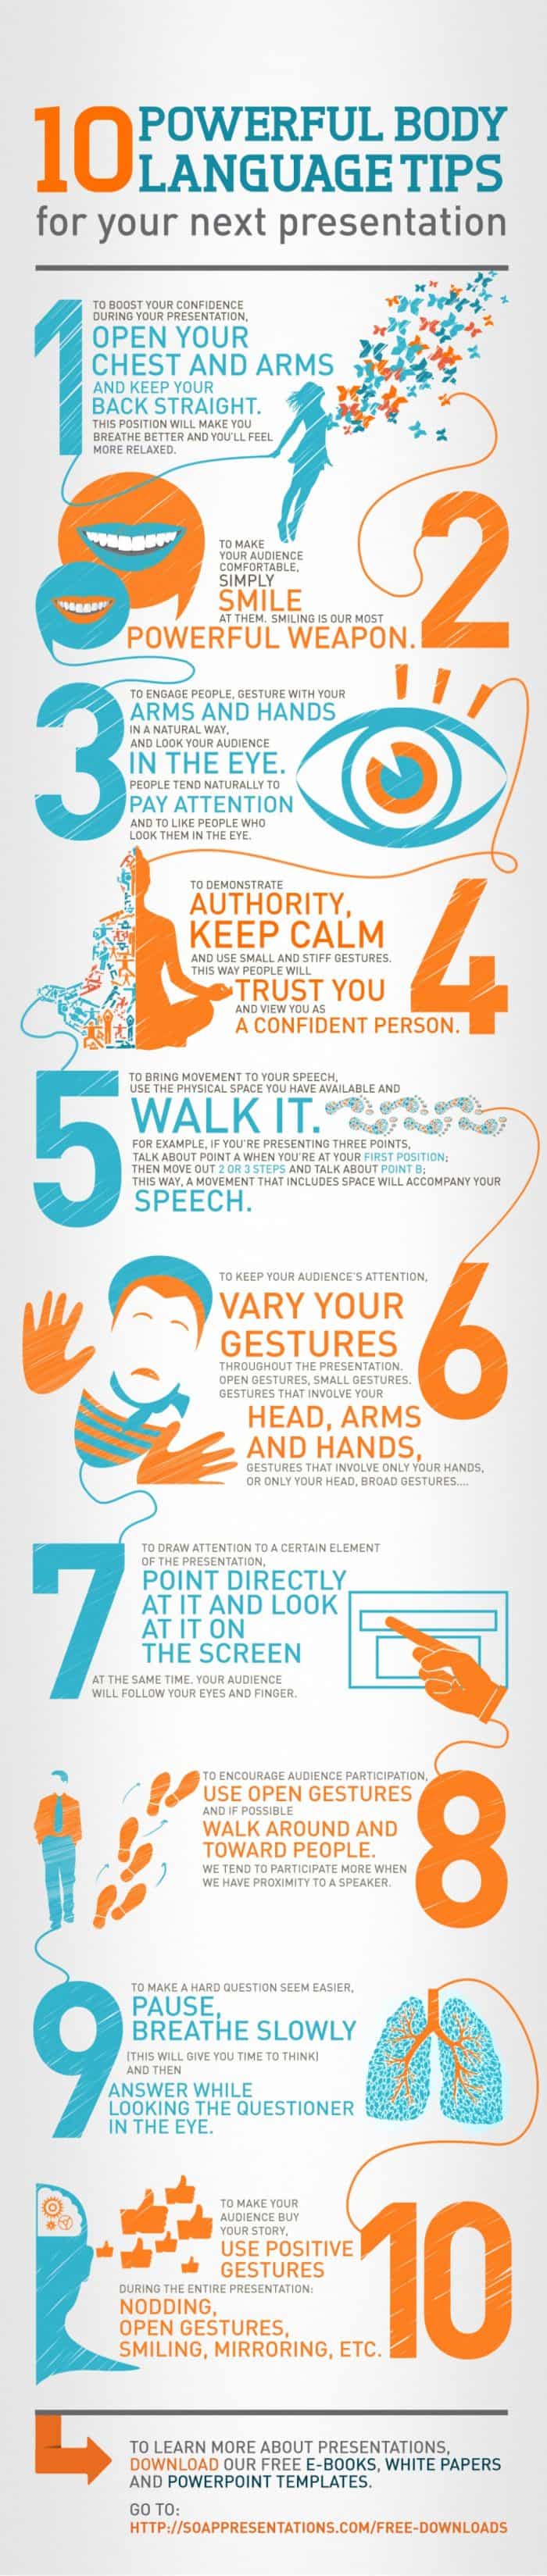 10 Powerful Body Language Tips Infographic